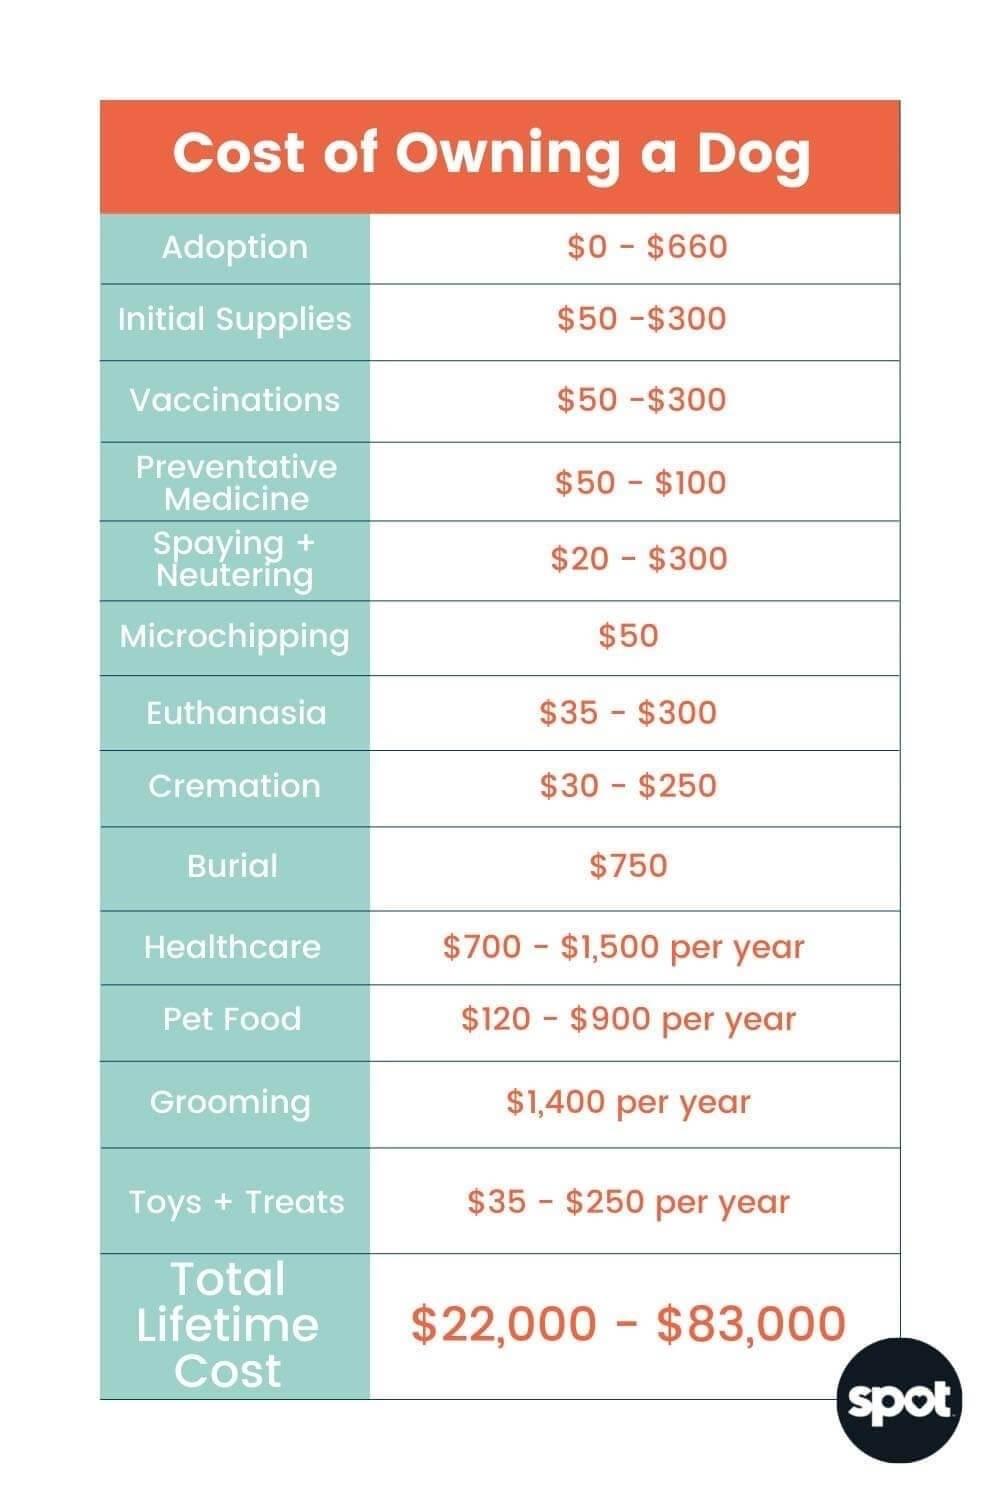 A table shows the cost of owning a dog, estimated between $22,000 and $83,000 over its lifetime.